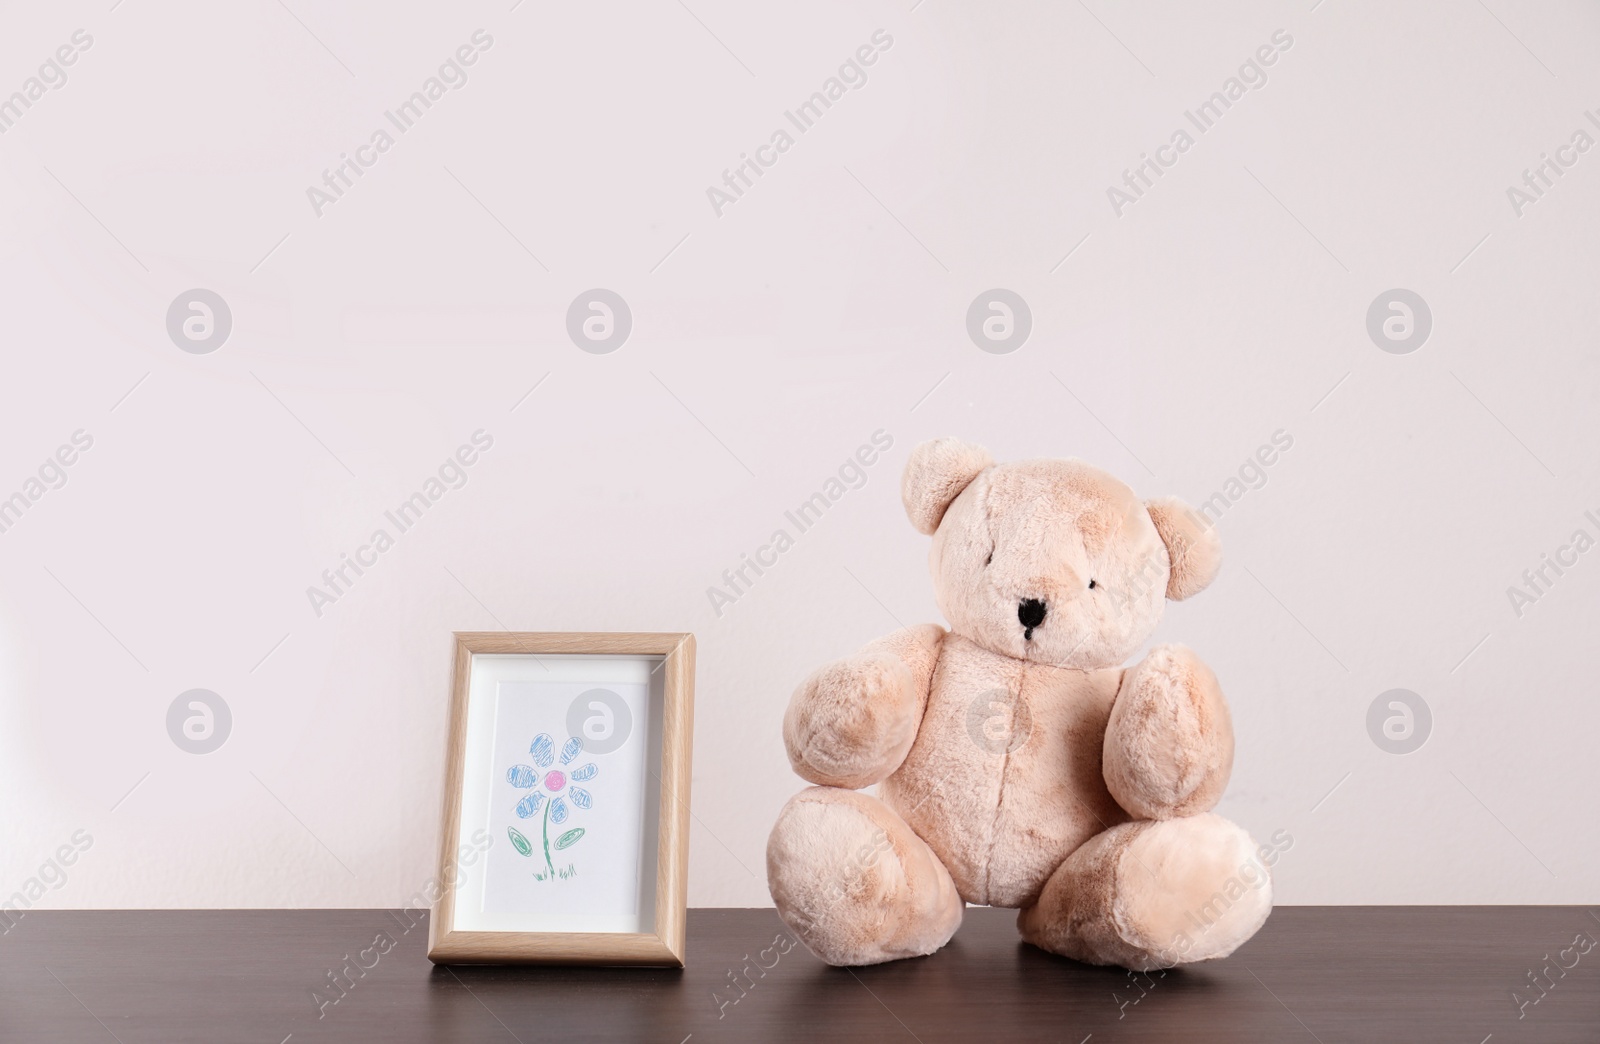 Photo of Adorable teddy bear and frame with cute picture on table against light background, space for text. Child room elements